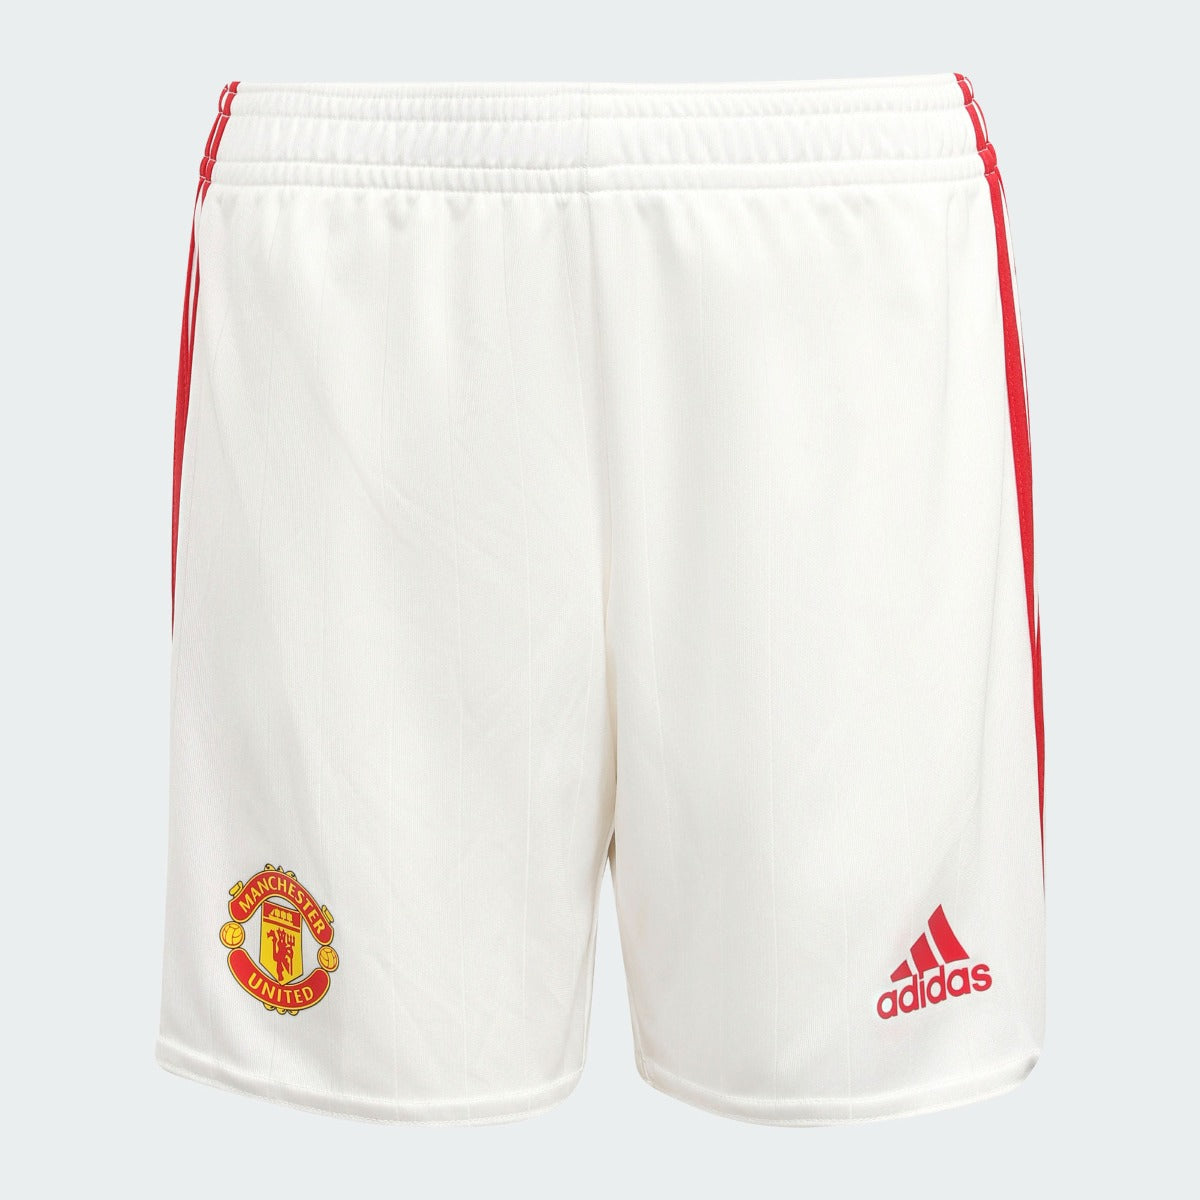 Adidas 2021-22 Manchester United Home MINI Set - Red-White (Shorts - Front)